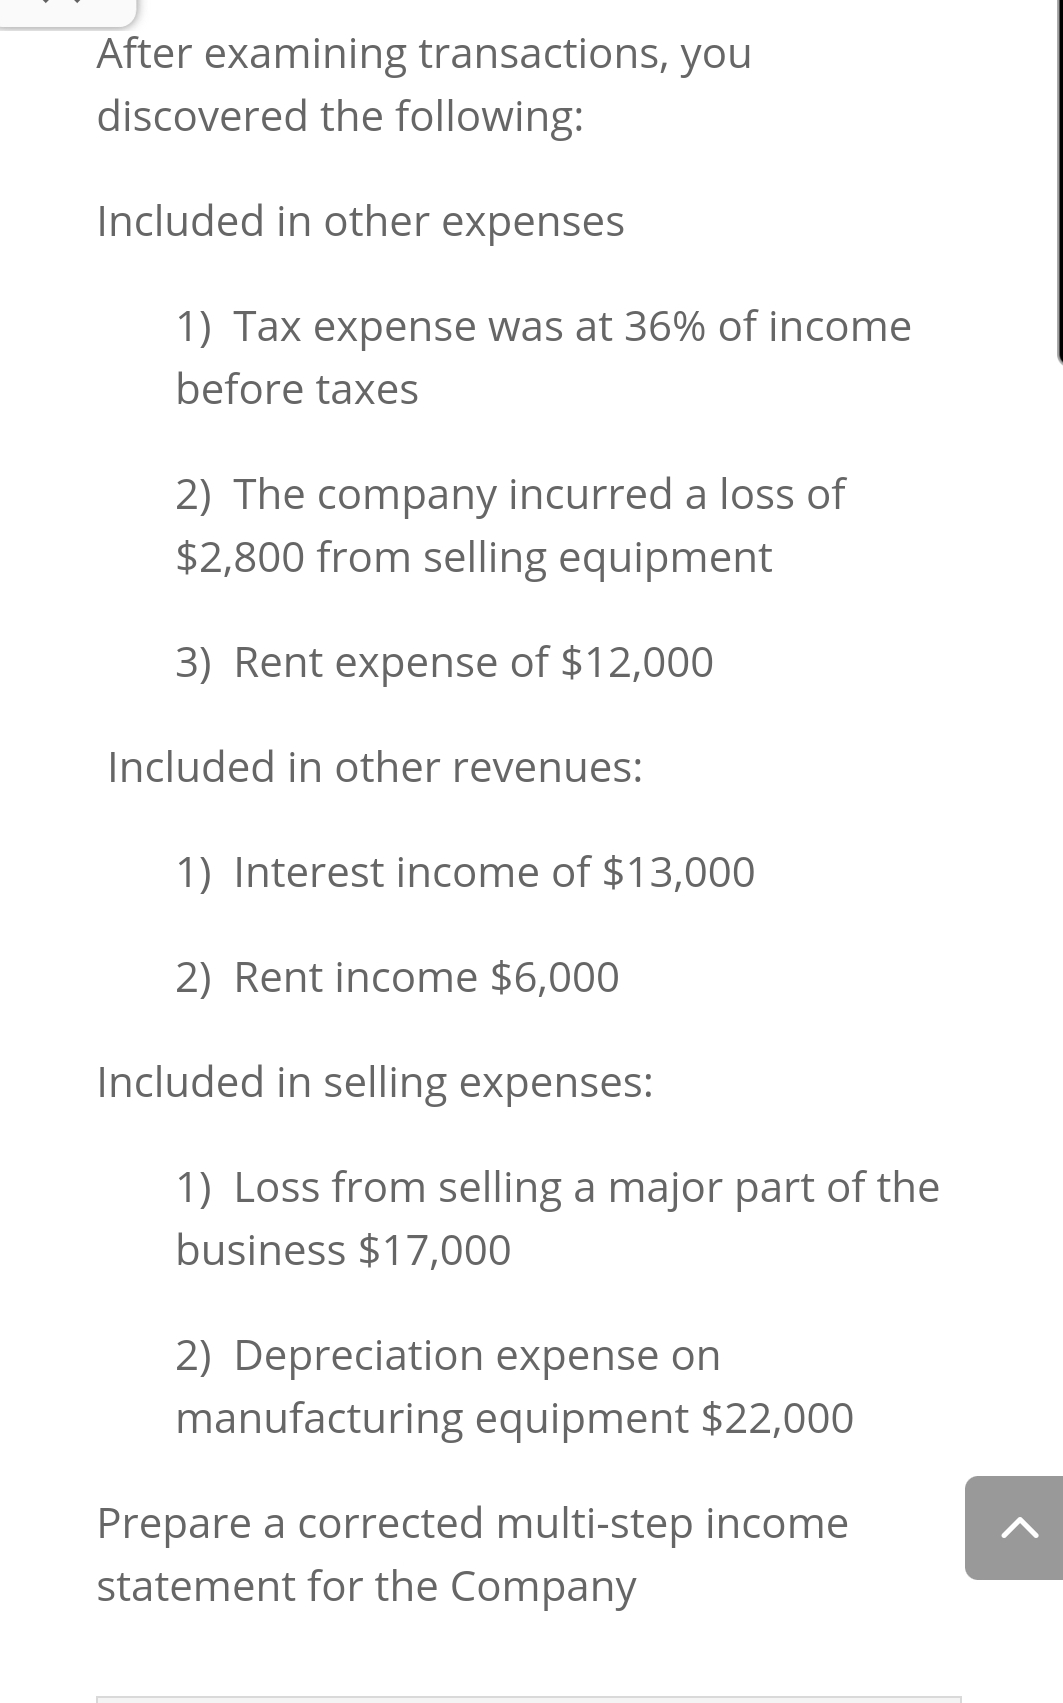 After examining transactions, you
discovered the following:
Included in other expenses
1) Tax expense was at 36% of income
before taxes
2) The company incurred a loss of
$2,800 from selling equipment
3) Rent expense of $12,000
Included in other revenues:
1) Interest income of $13,000
2) Rent income $6,000
Included in selling expenses:
1) Loss from selling a major part of the
business $17,000
2) Depreciation expense on
manufacturing equipment $22,000
Prepare a corrected multi-step income
statement for the Company
